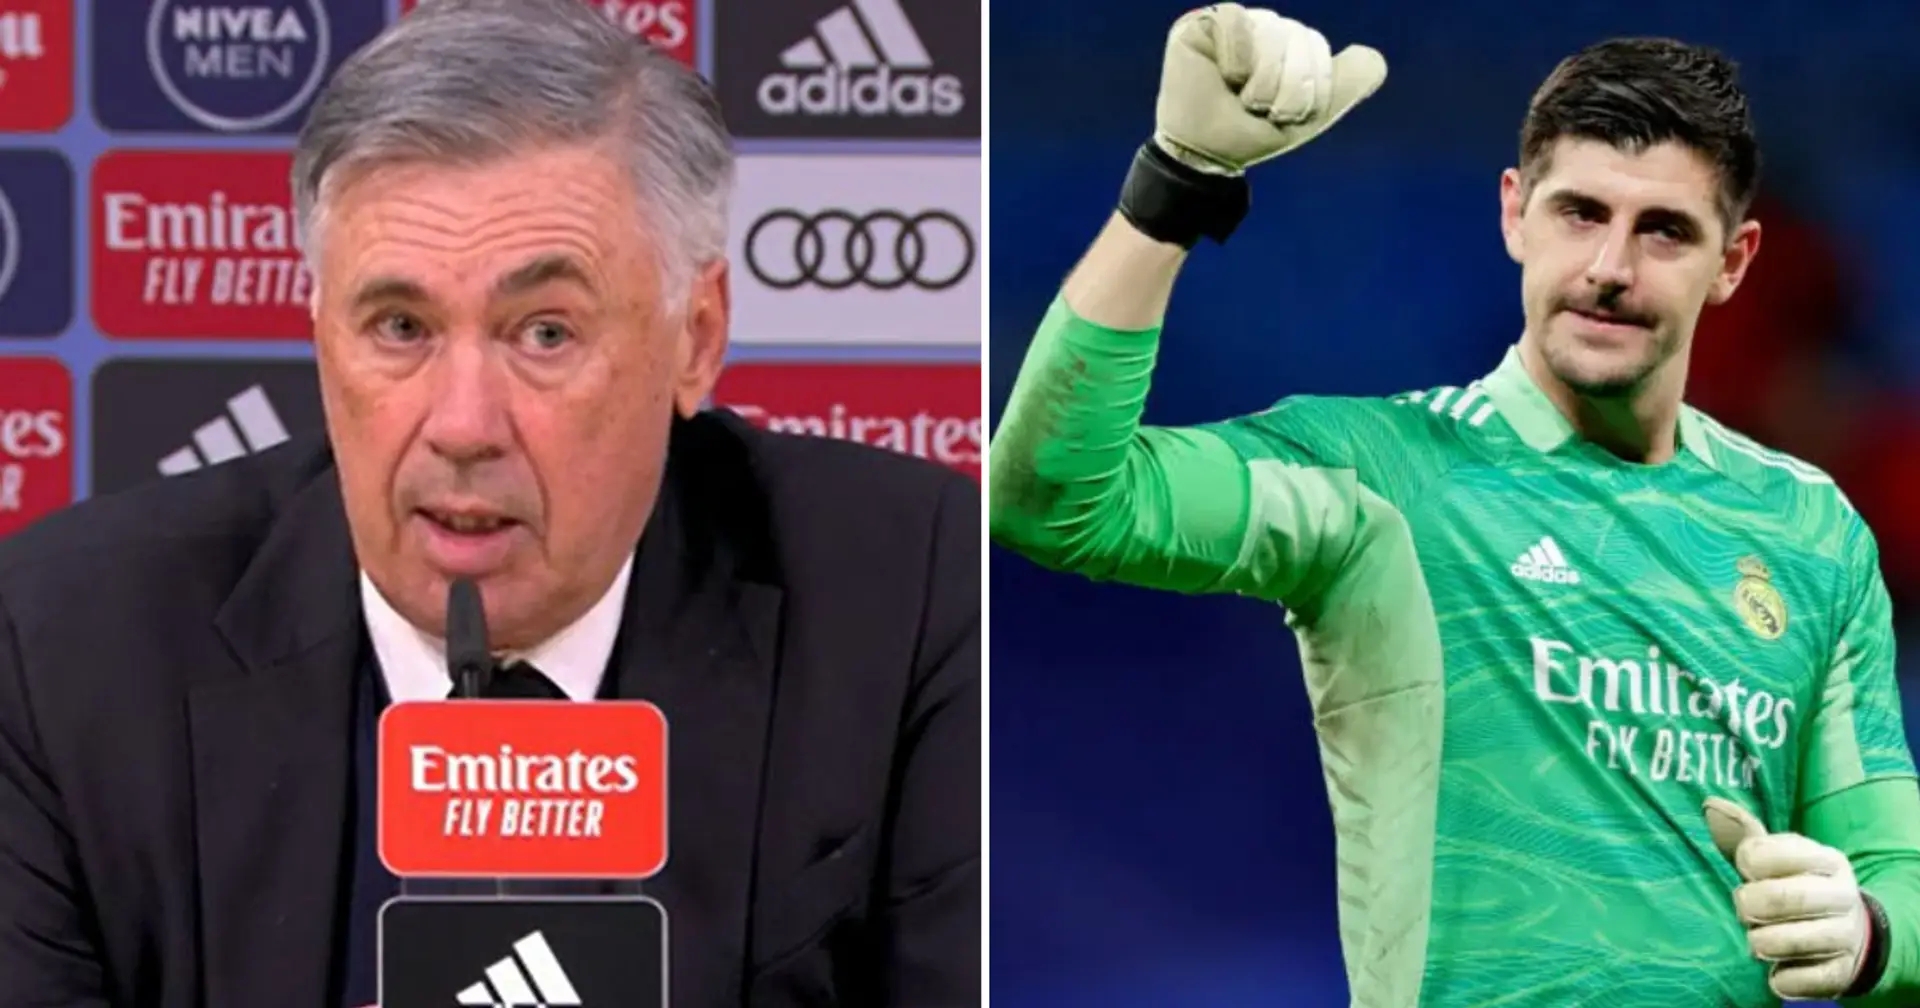 Ancelotti compares Courtois to Neuer and Buffon after Bilbao win